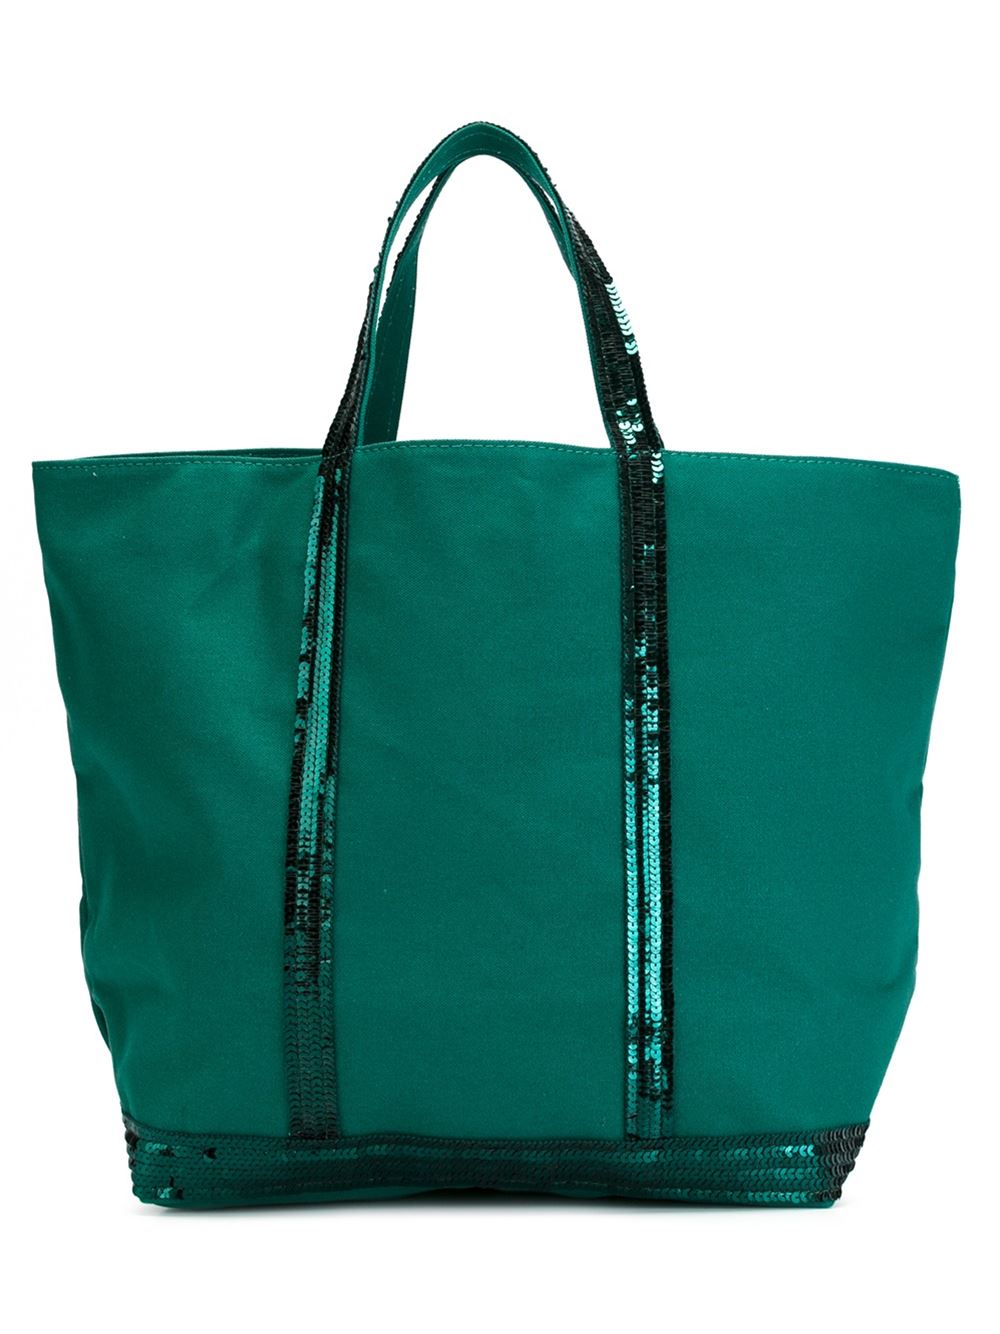 Vanessa bruno Large Sequin Tote Bag in Green | Lyst